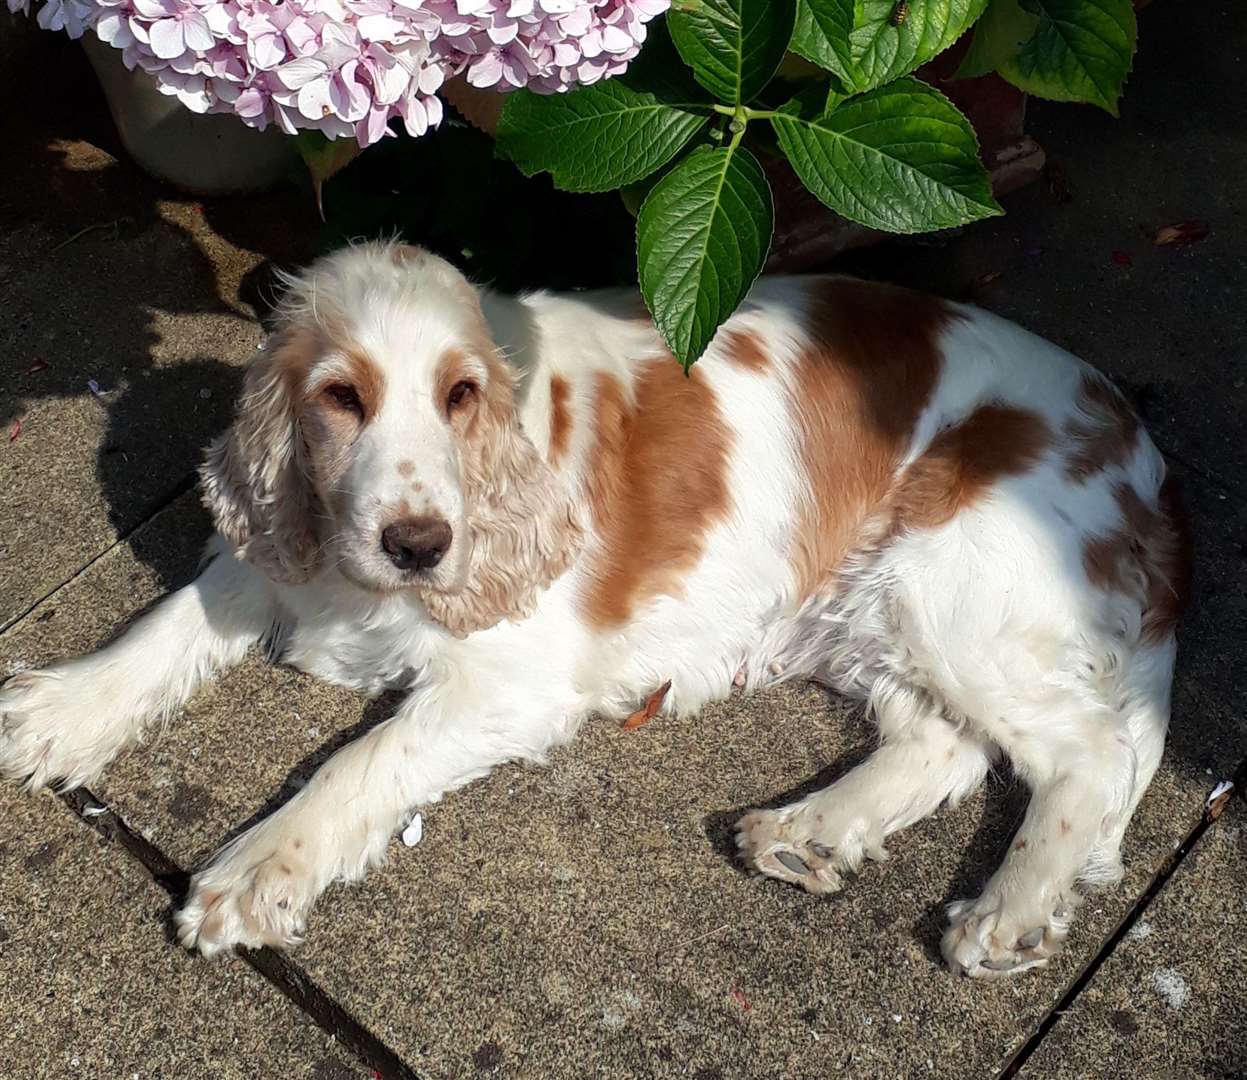 Daisy the dog was taken from Hollingbourne